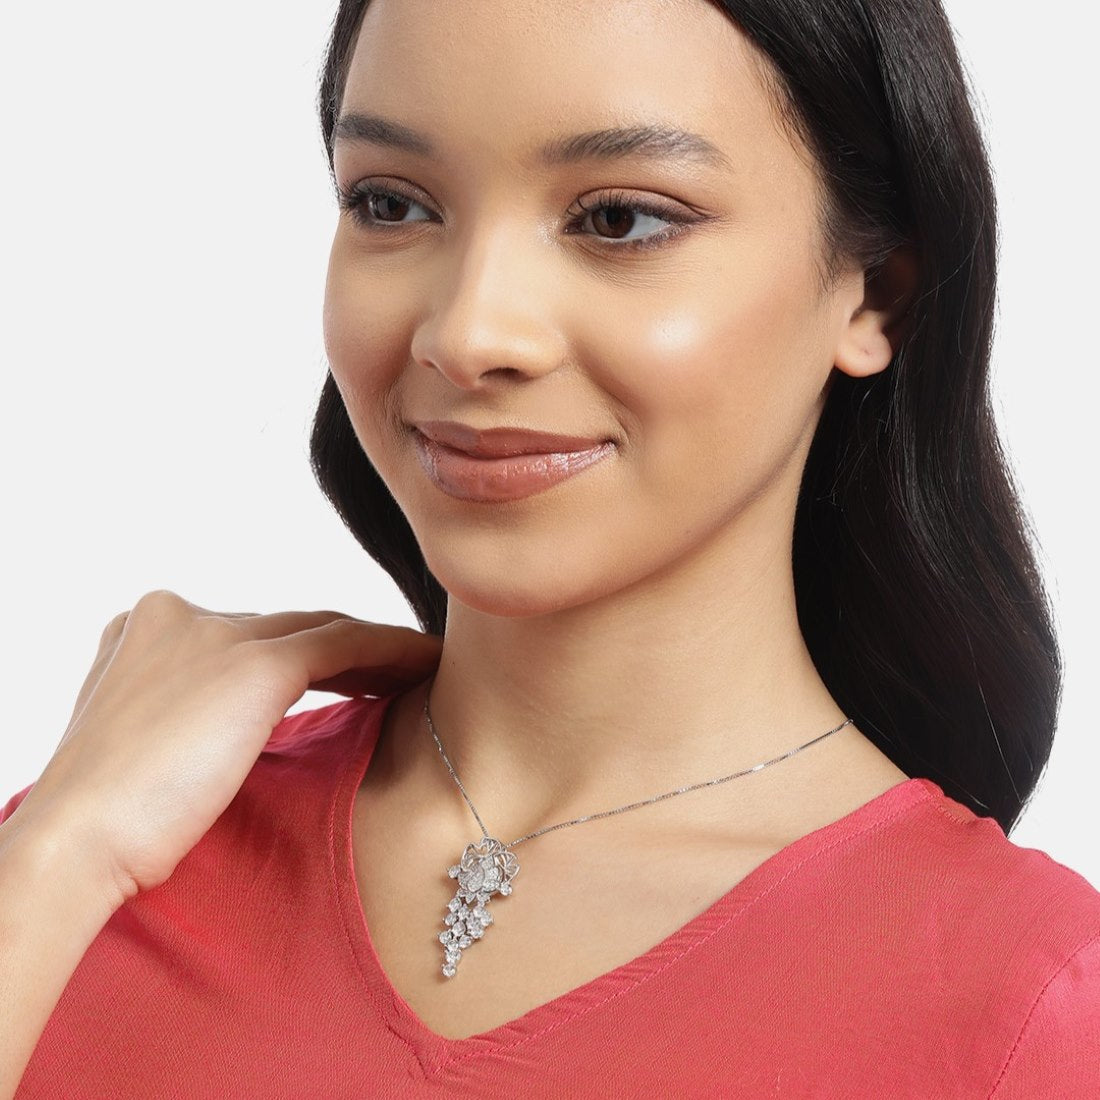 Floral Radiance Elegance Rhodium-Plated 925 Sterling Silver Charm Pendant with Chain